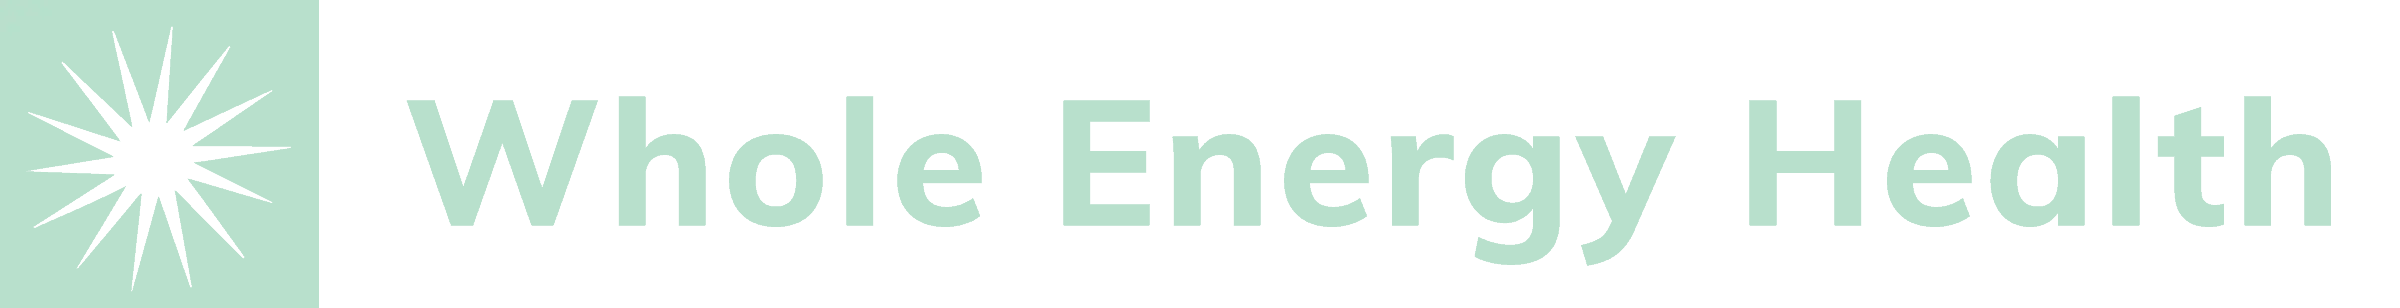 Whole Energy Health title and logo, our turnkey energy management solution